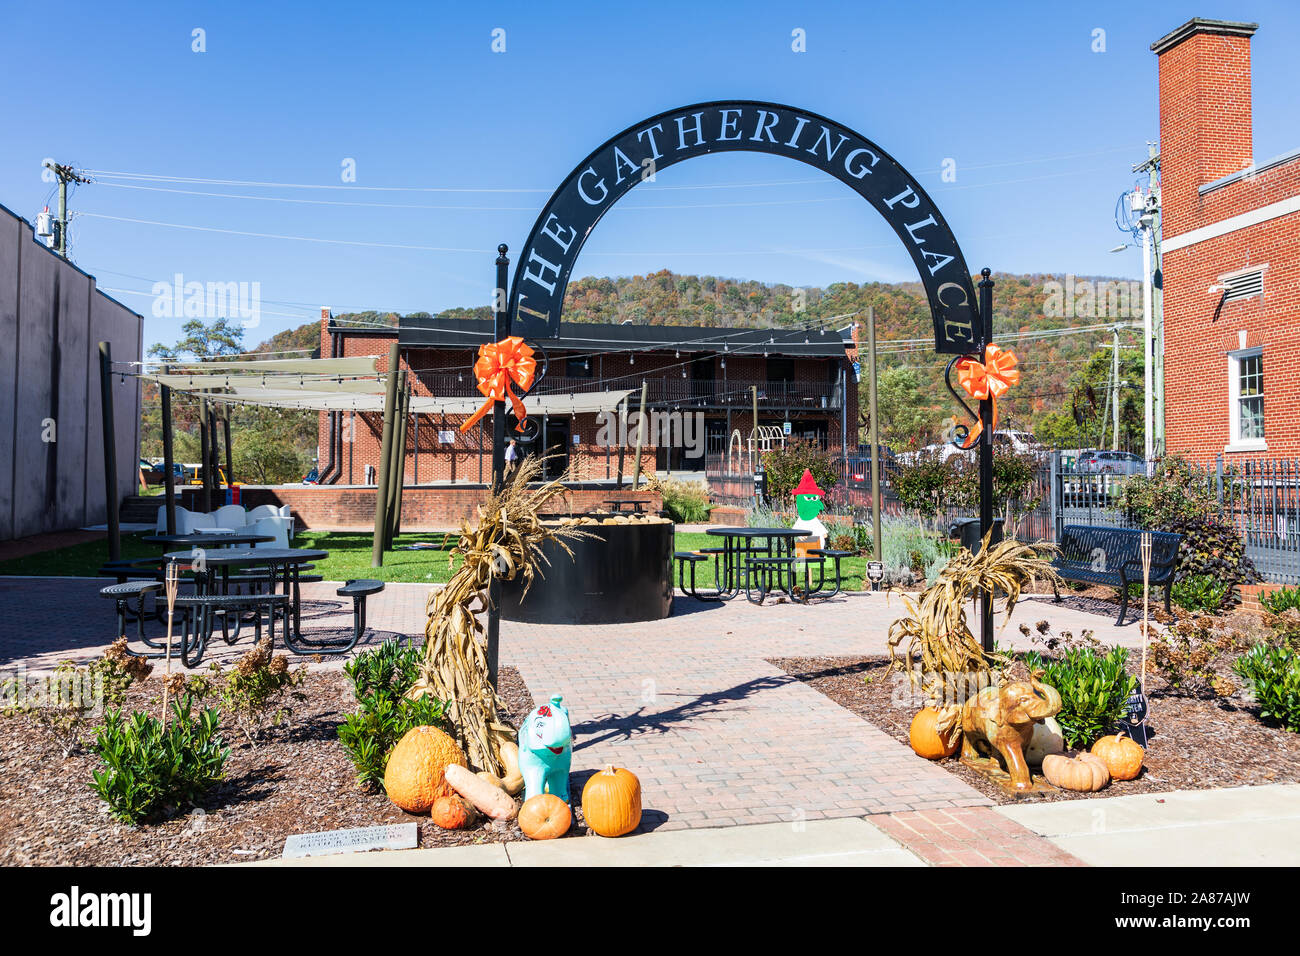 ERWIN, TN, USA-28 OCT 2019: A small public space called 'The Gathering Place' on Main Street. Stock Photo